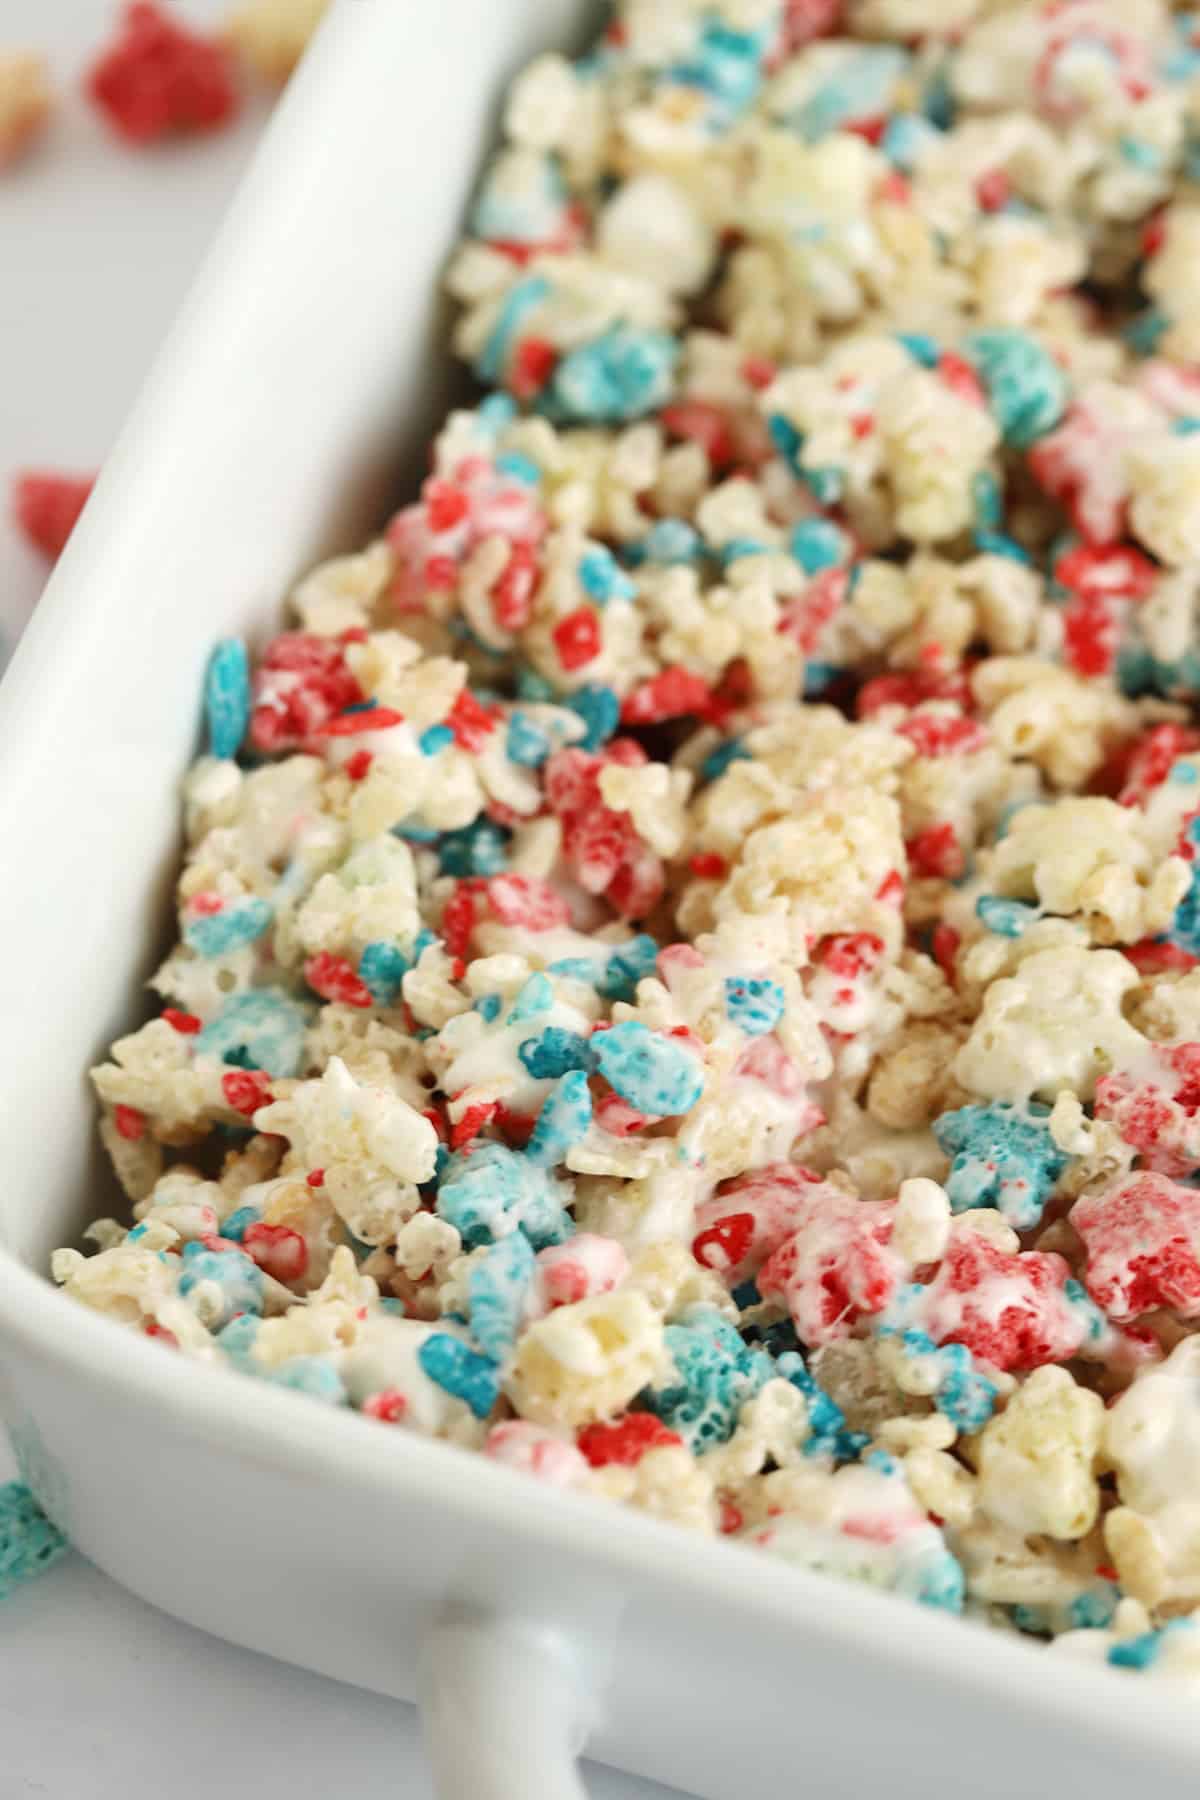 Red, white and blue rice krispies treats spread into a baking dish.